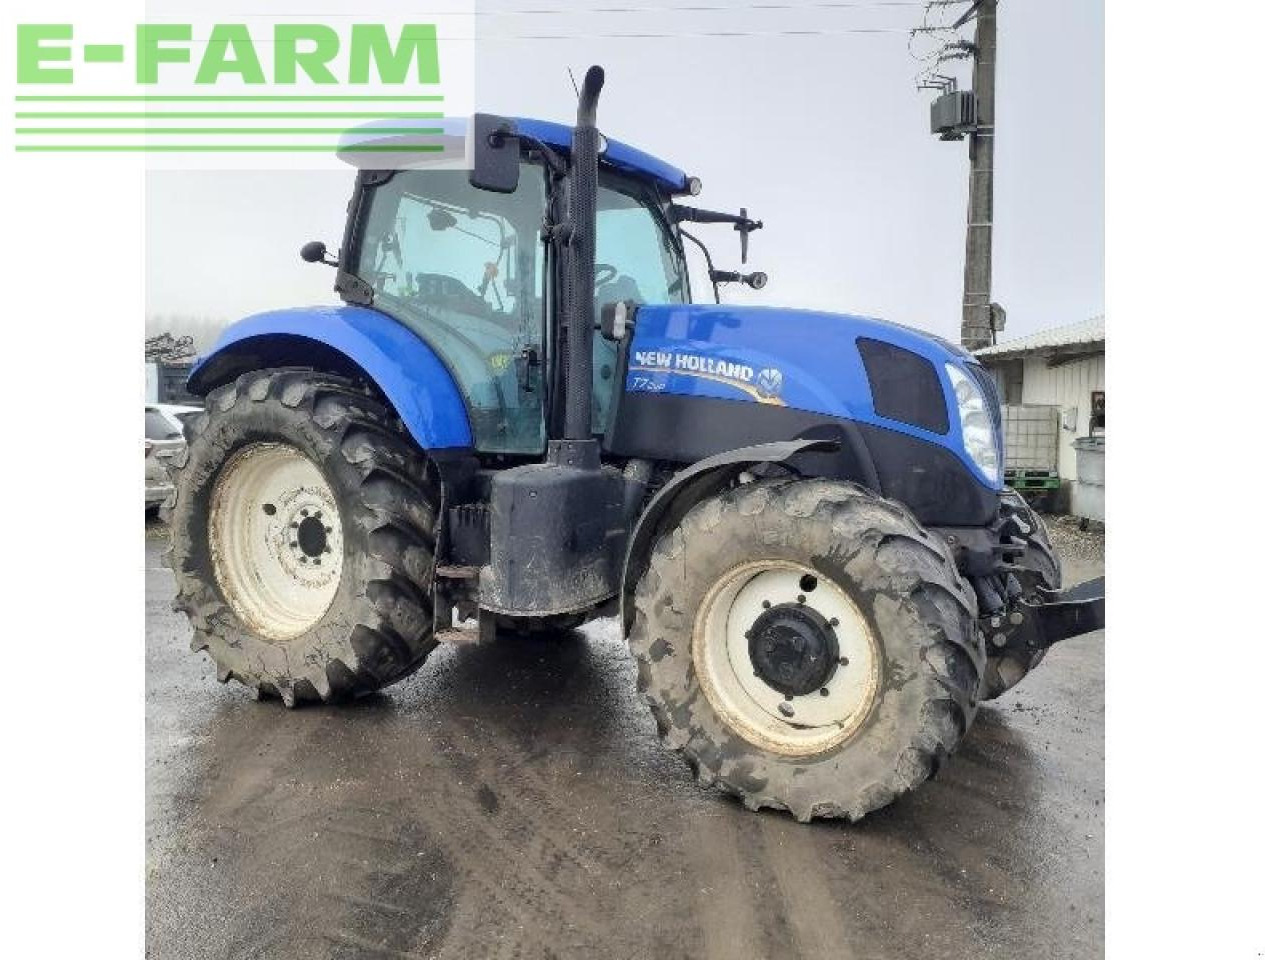 Farm tractor New Holland t7.200 r c clas.: picture 2